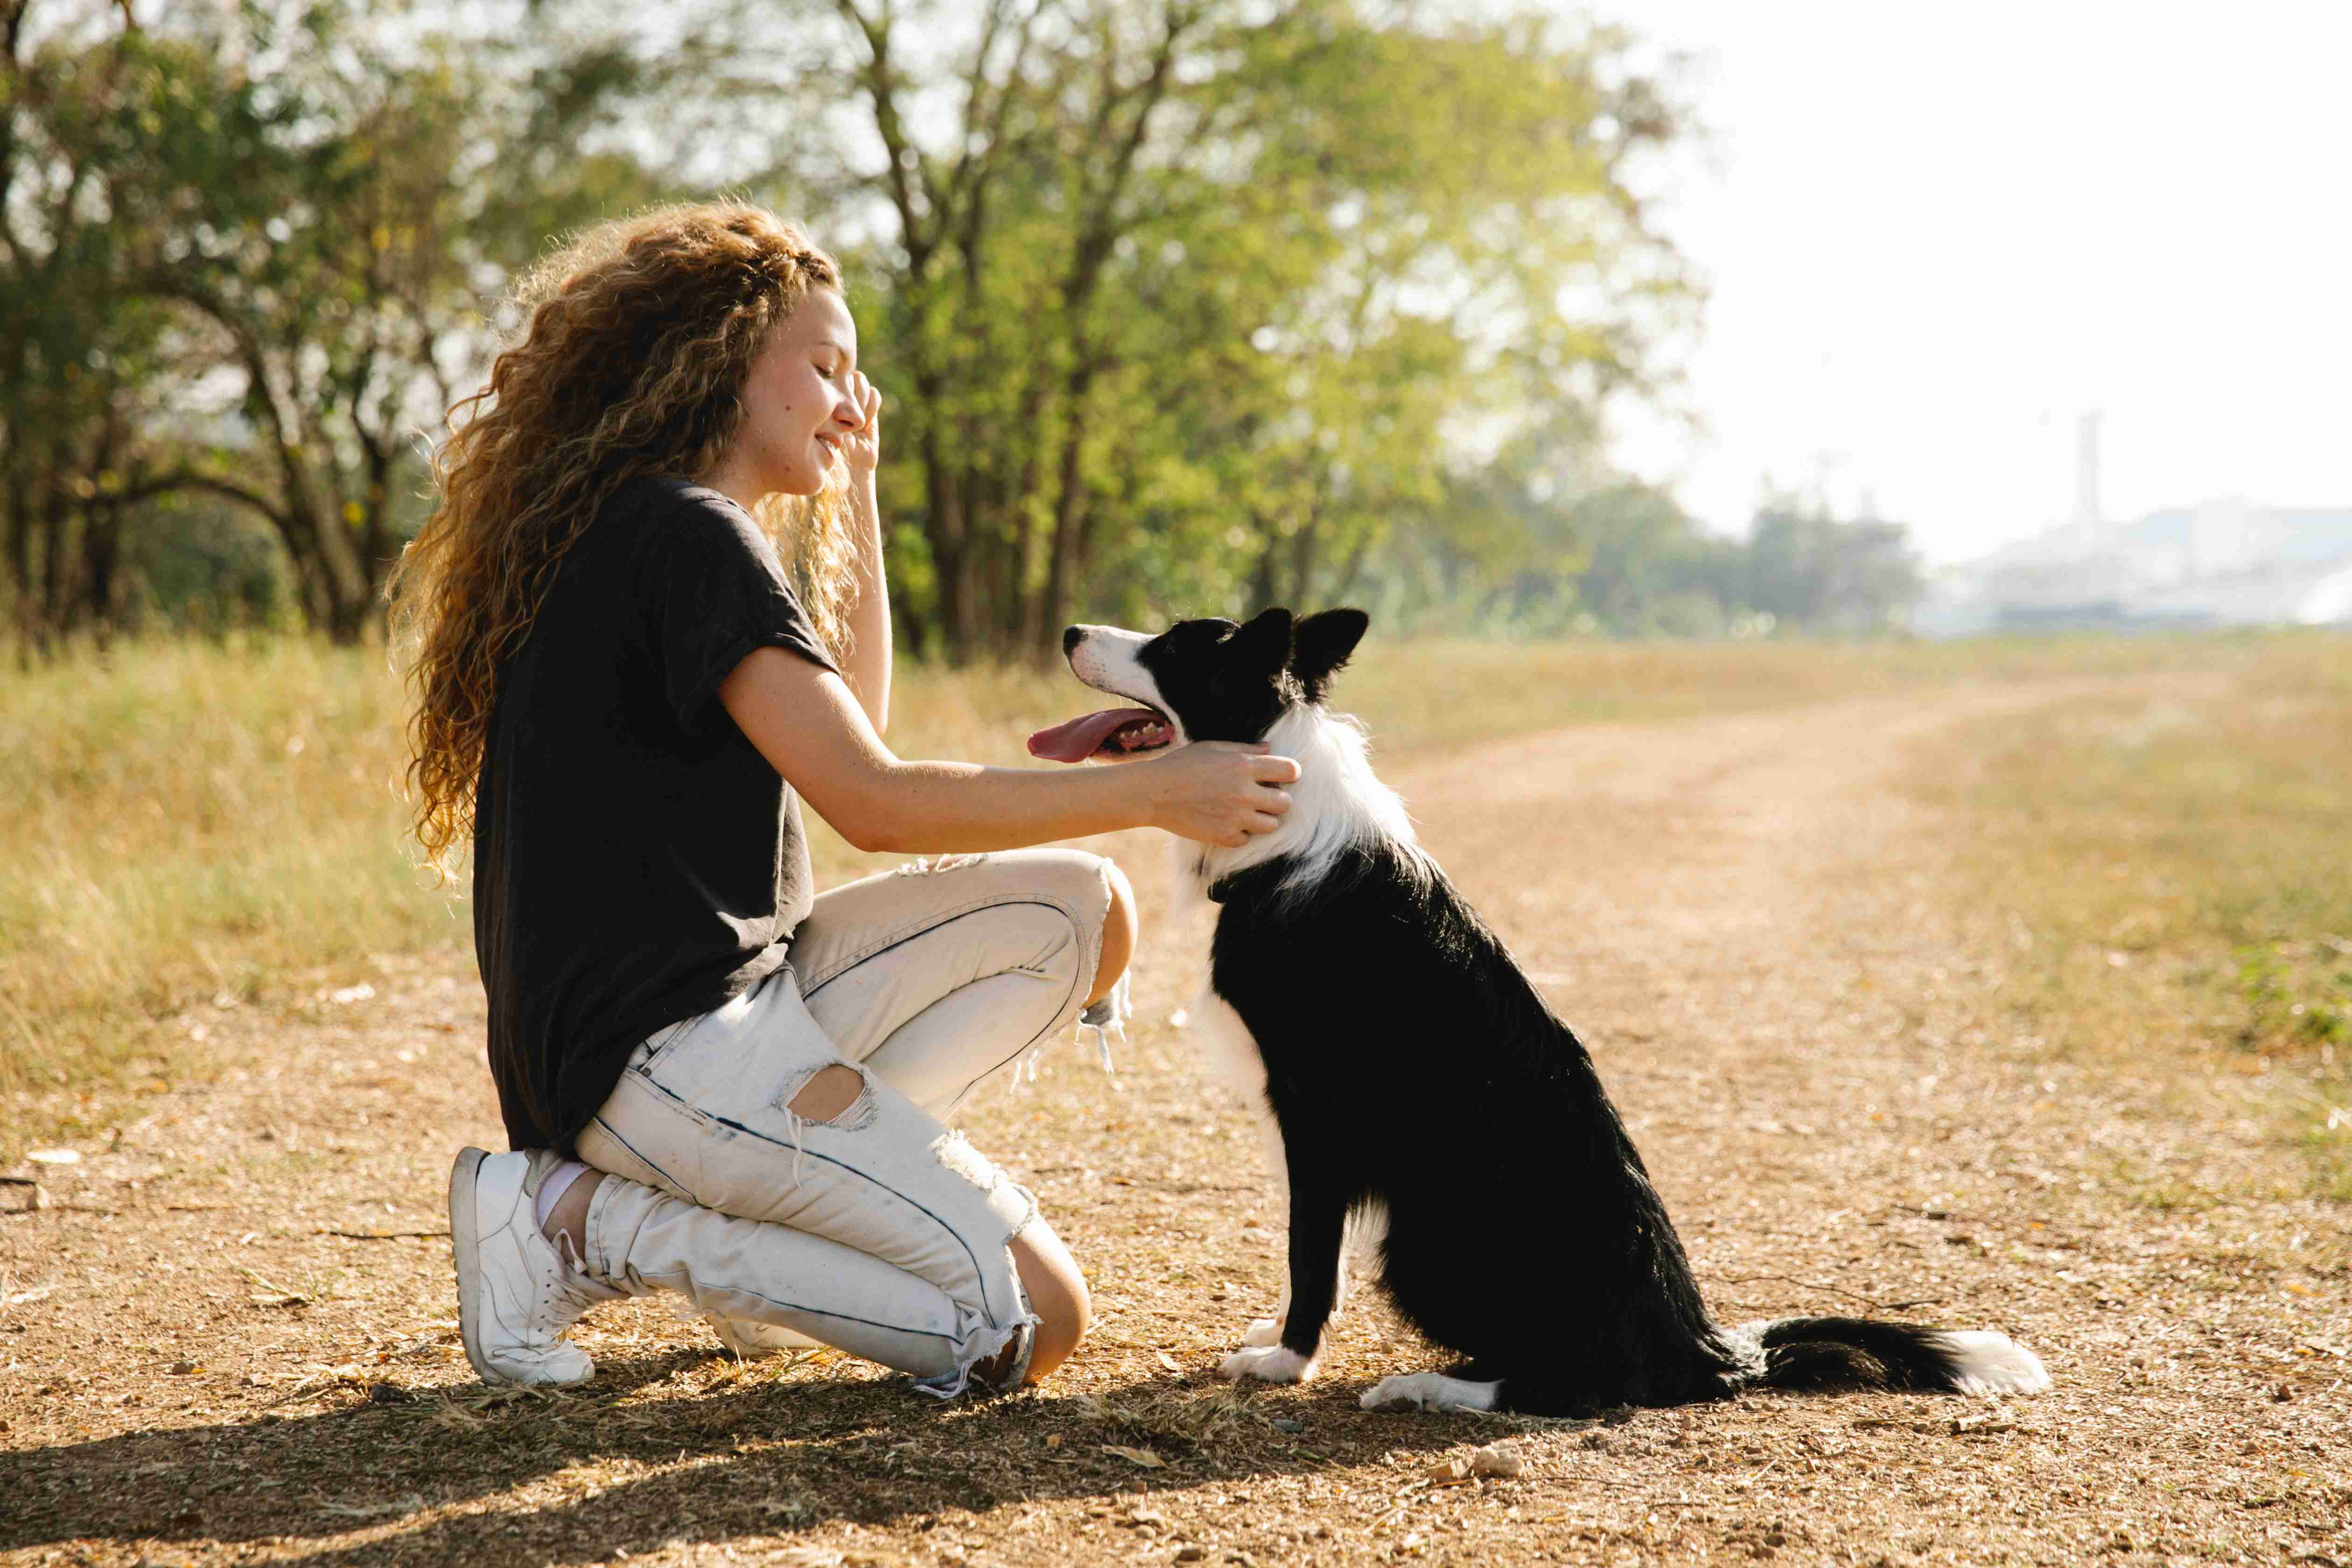 Border Collie Health Guide: Common Health Issues You Should Know